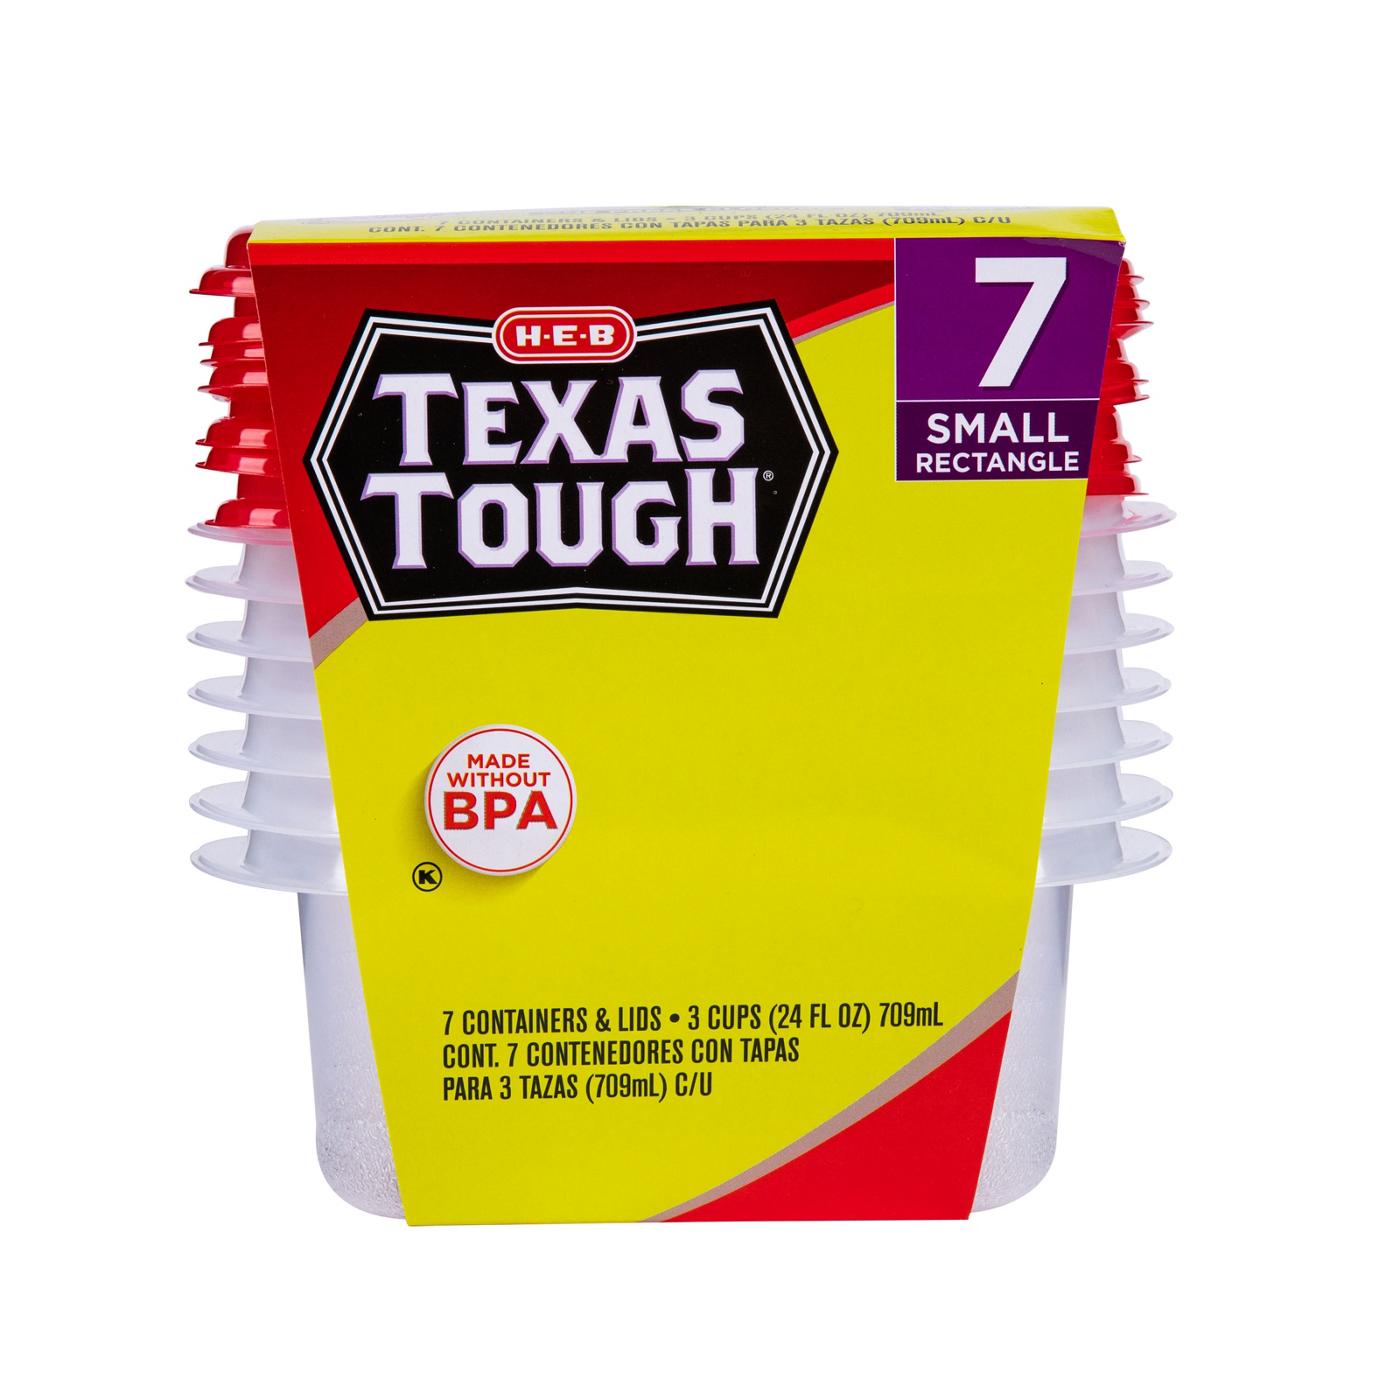 H-E-B Texas Tough Small Rectangle Reusable Containers with Lids; image 1 of 3